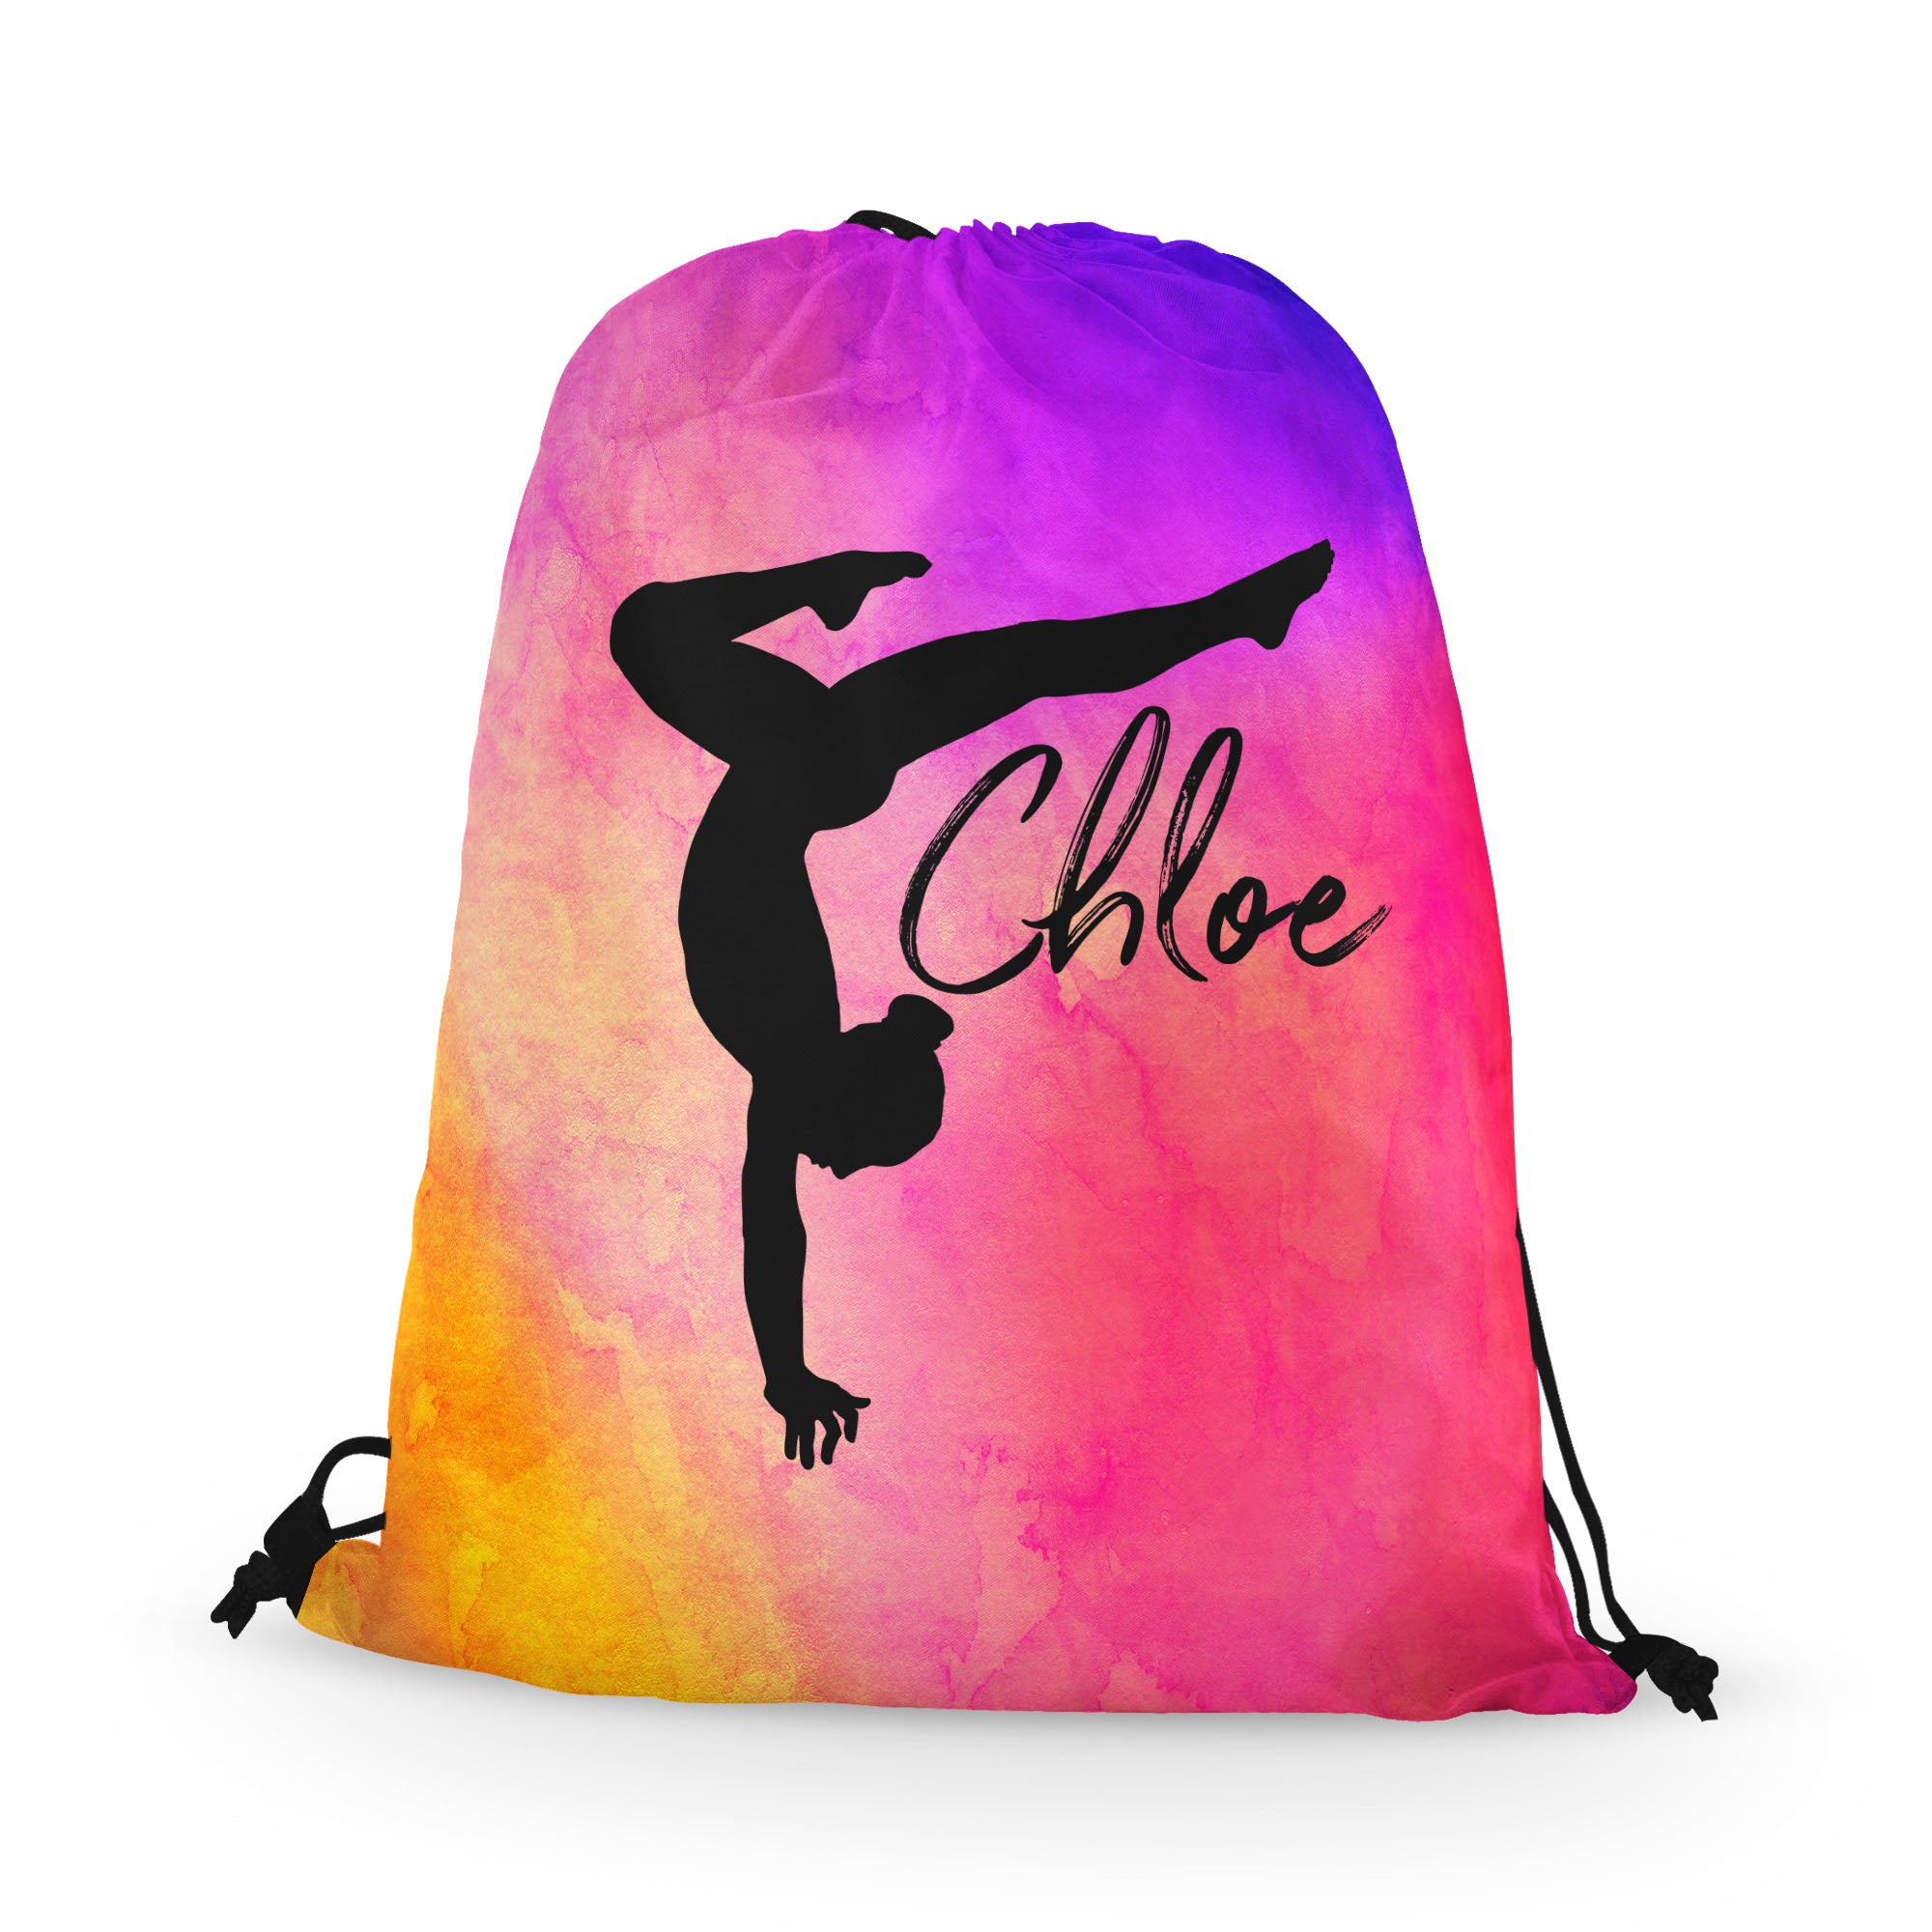 Personalized Gymnast Stag Pose Drawstring Bag, Perfect Gymnast Gift!